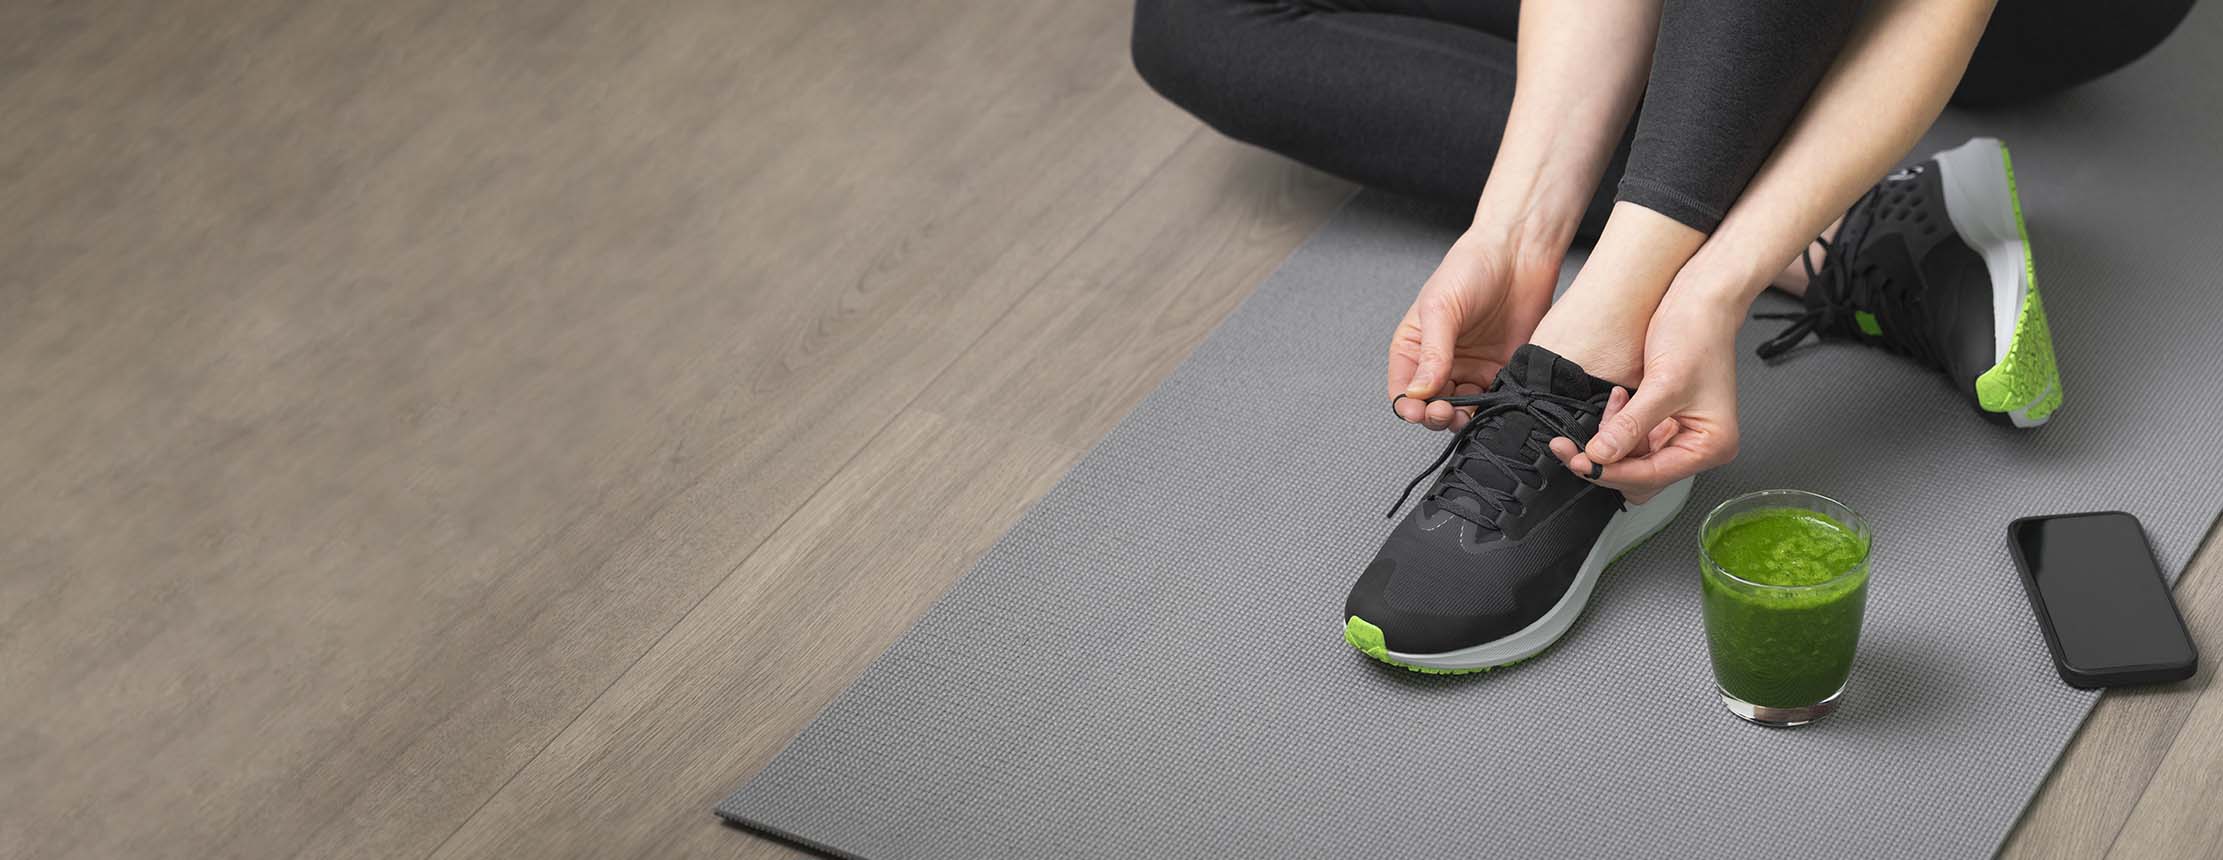 Woman ties laces on yoga mat with juice to the side